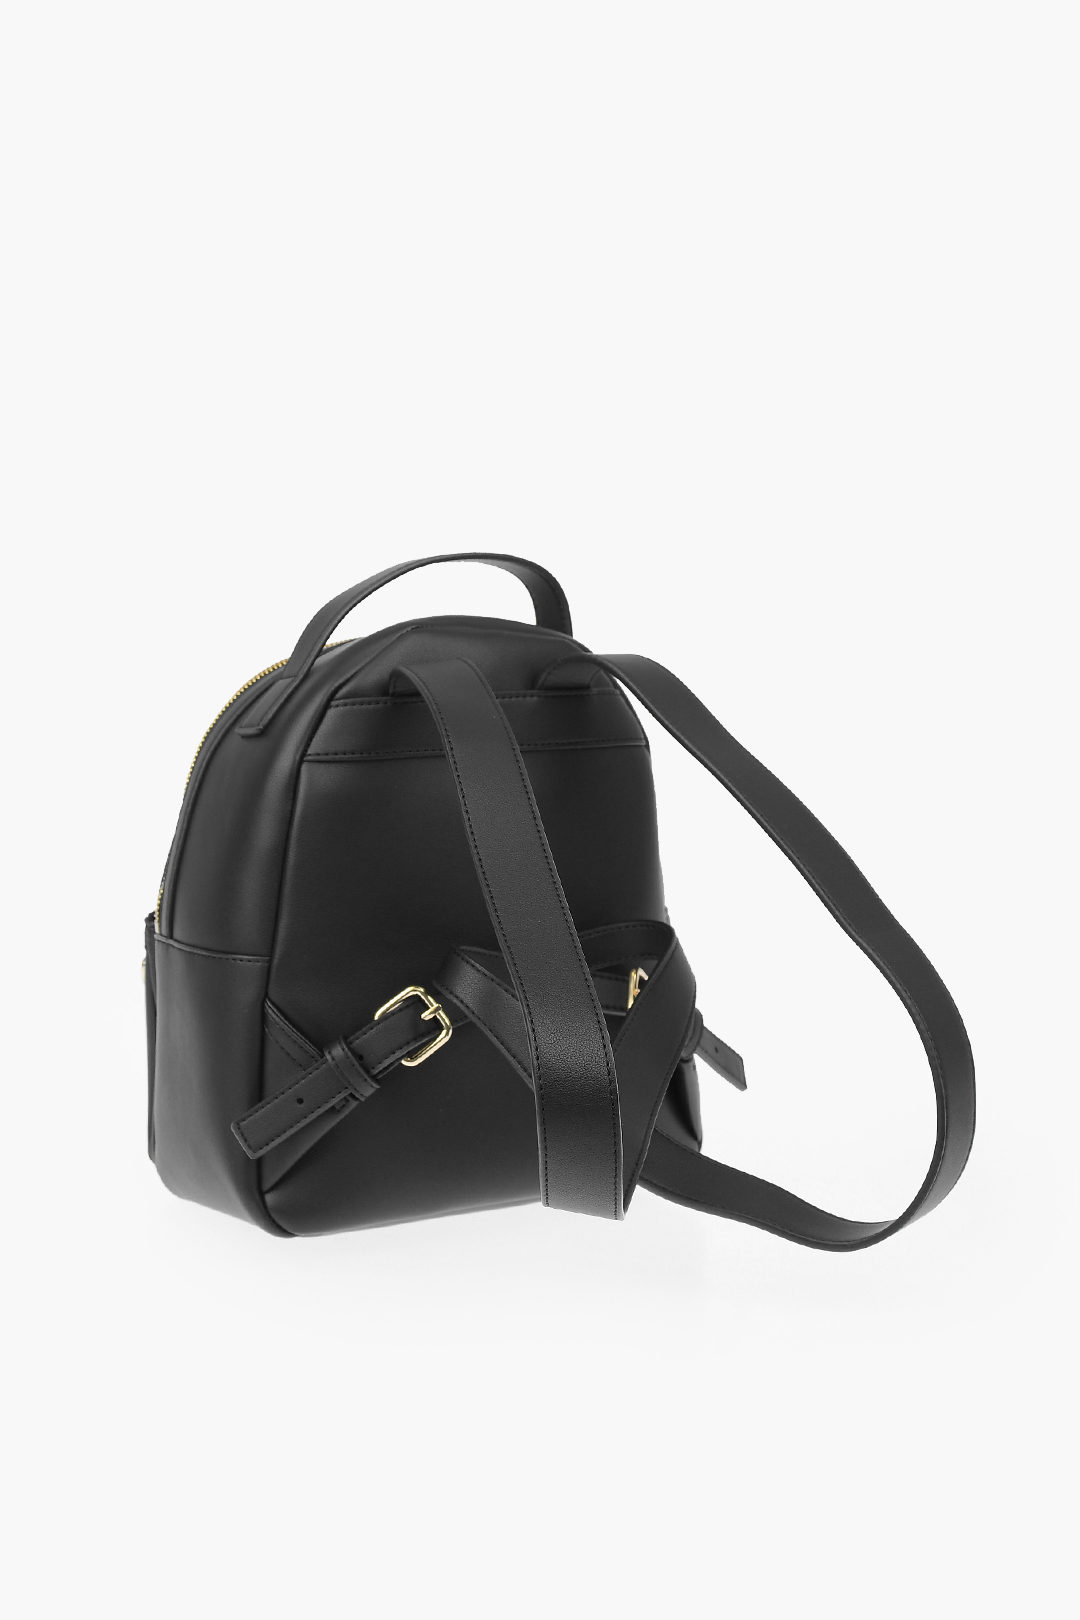 Moschino LOVE faux leather backpack with golden chain women